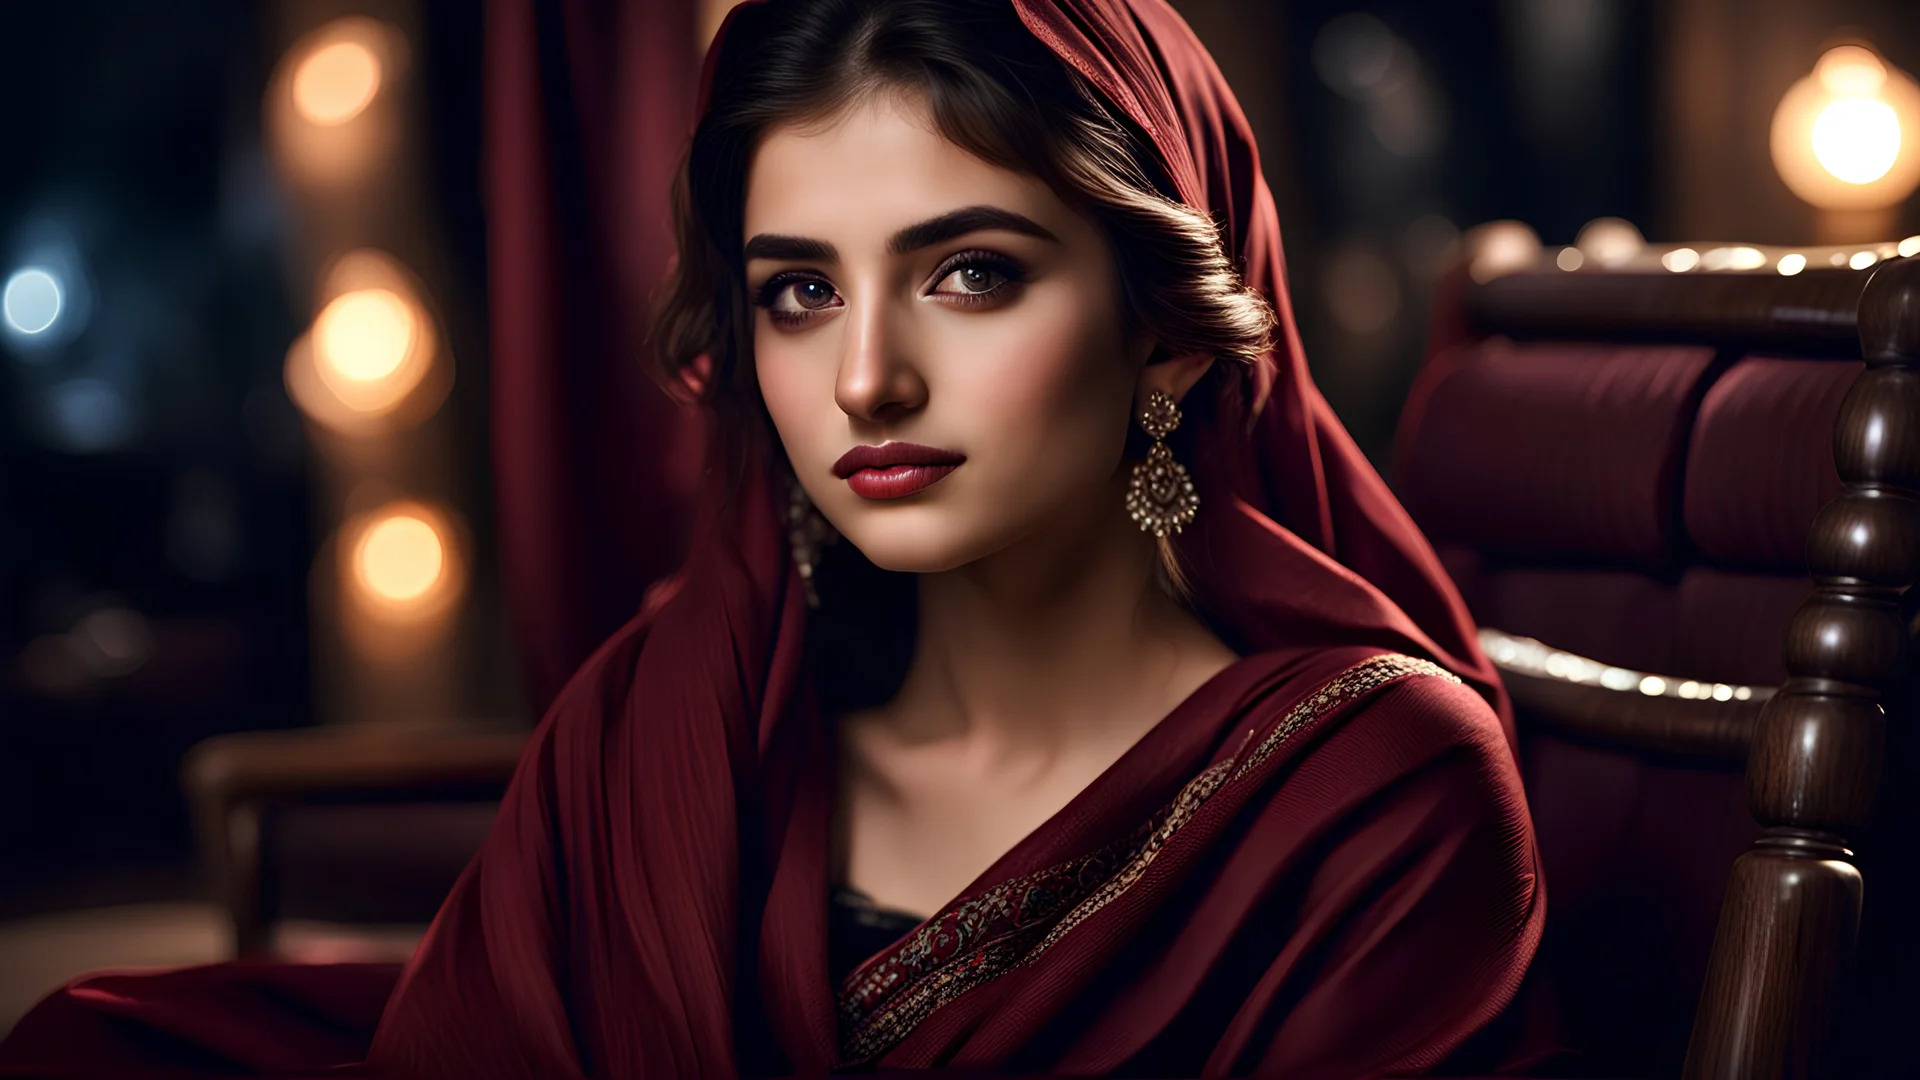 Hyper Realistic Photographic-close-view of Young Beautiful Pashto Girl with-beautiful-eyes-&-lips in a Maroon-dress-&-black-shawl & giving bold expressions-with-little-smile sitting on a rocking-chair with beautiful moonlight-rays-on-her-face at night inside a dark lounge showing dramatic & cinematic ambiance.